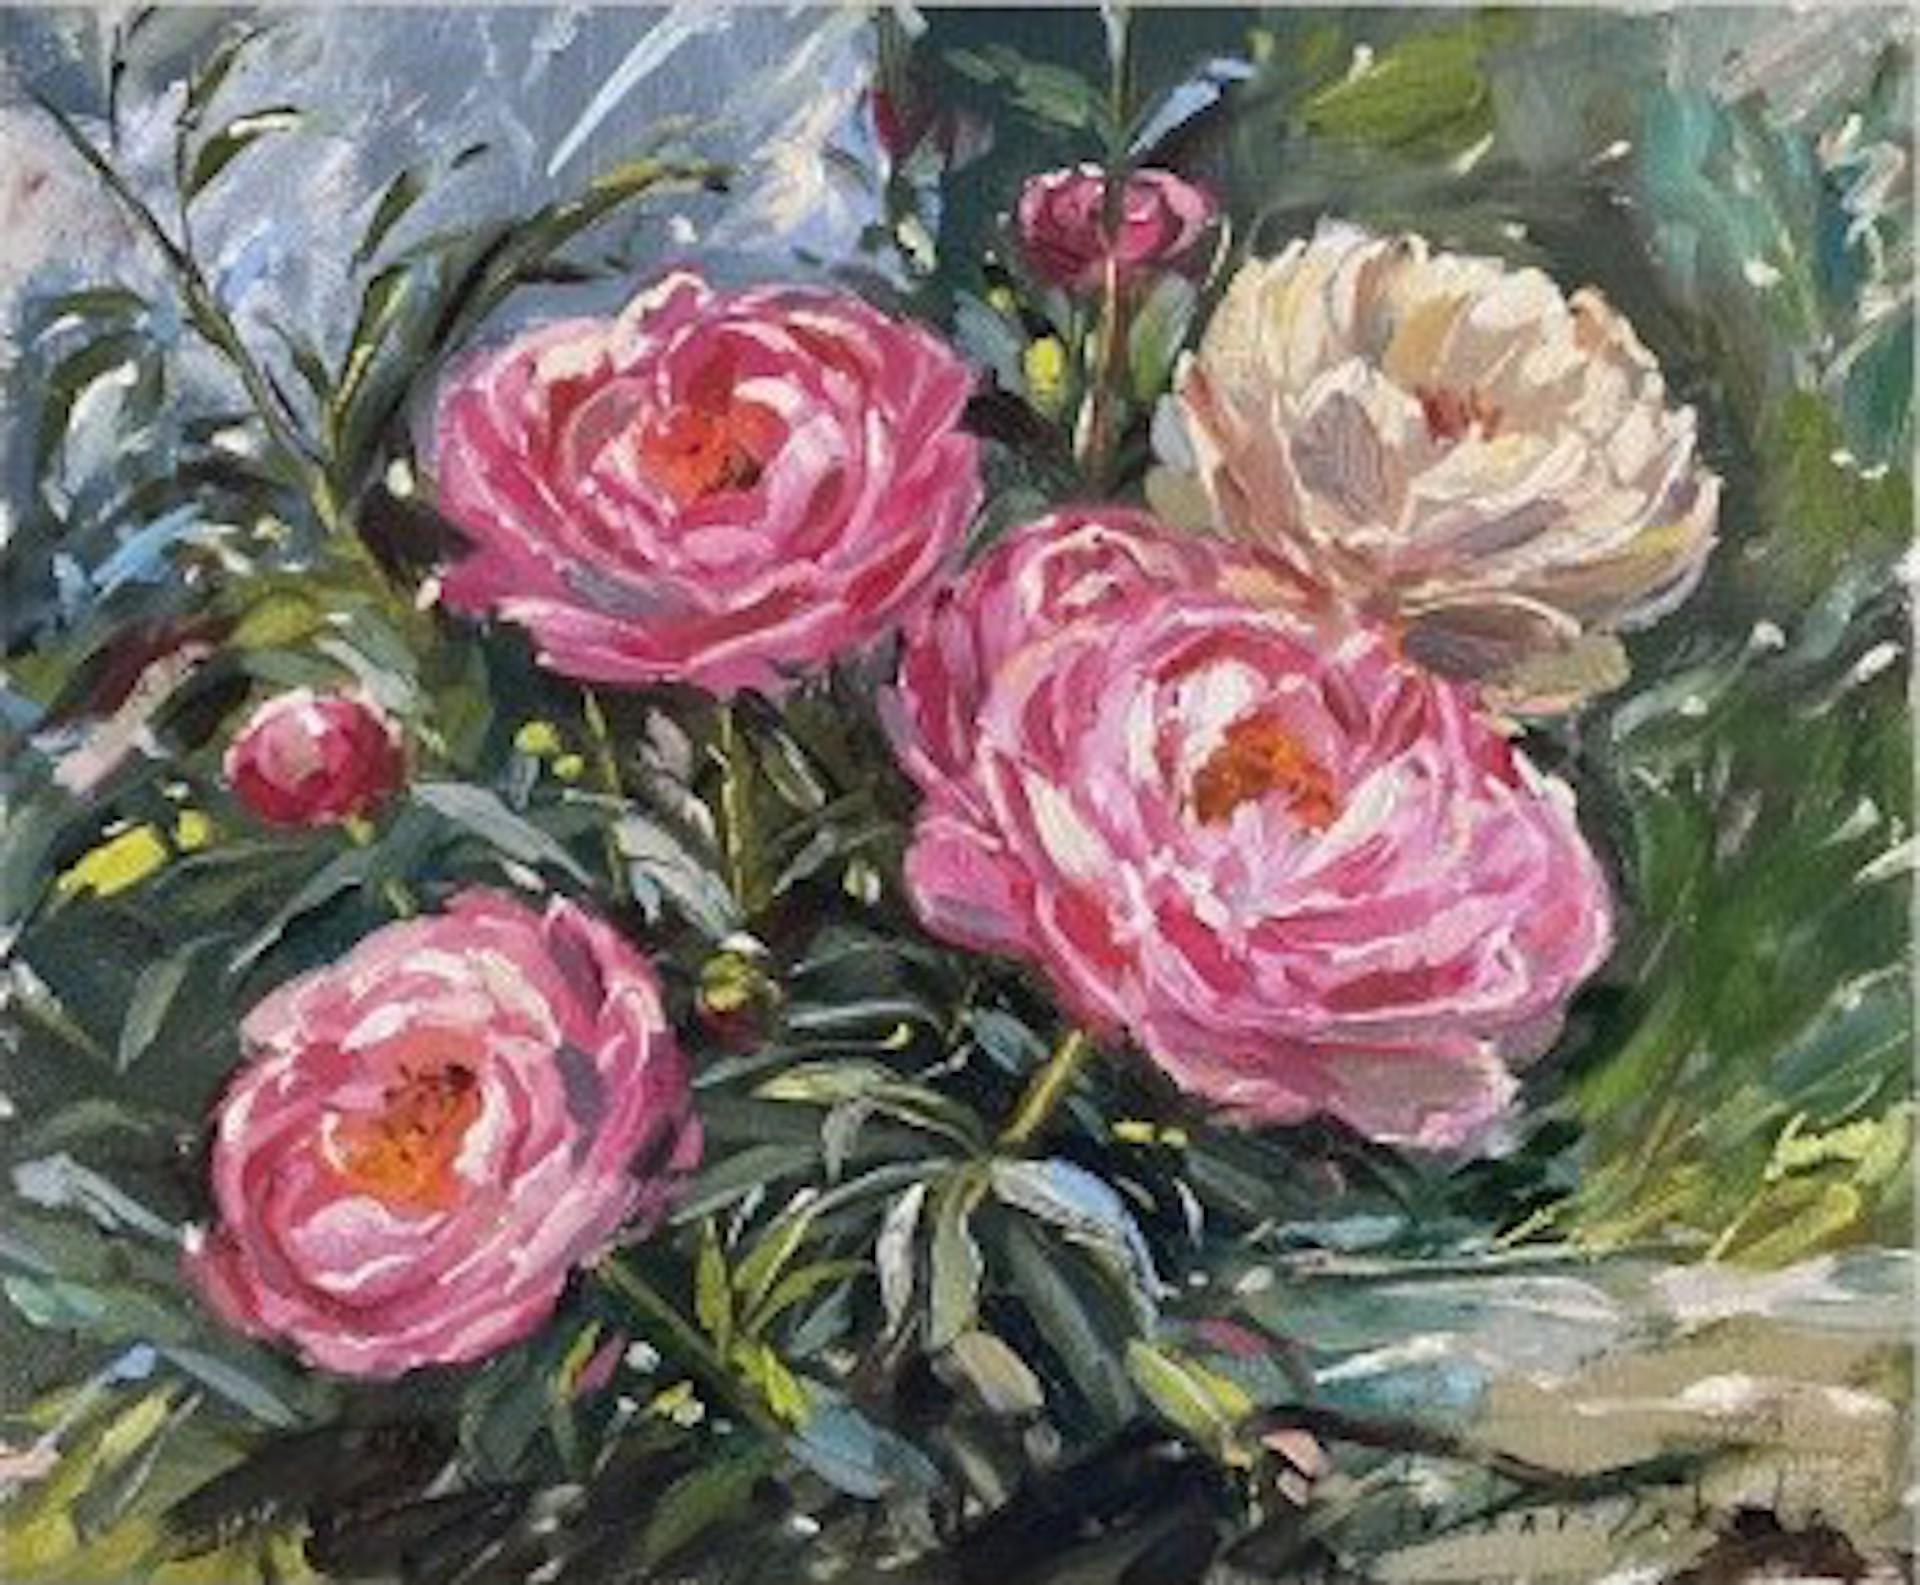 Pink and White Peonies by Tushar Sabale [2021]
Please note that insitu images are purely an indication of how a piece may look
Spring Pink and White peonies from Artists garden.
Tushar Sabale has paintings available with Wychwood Art. Tushar is an